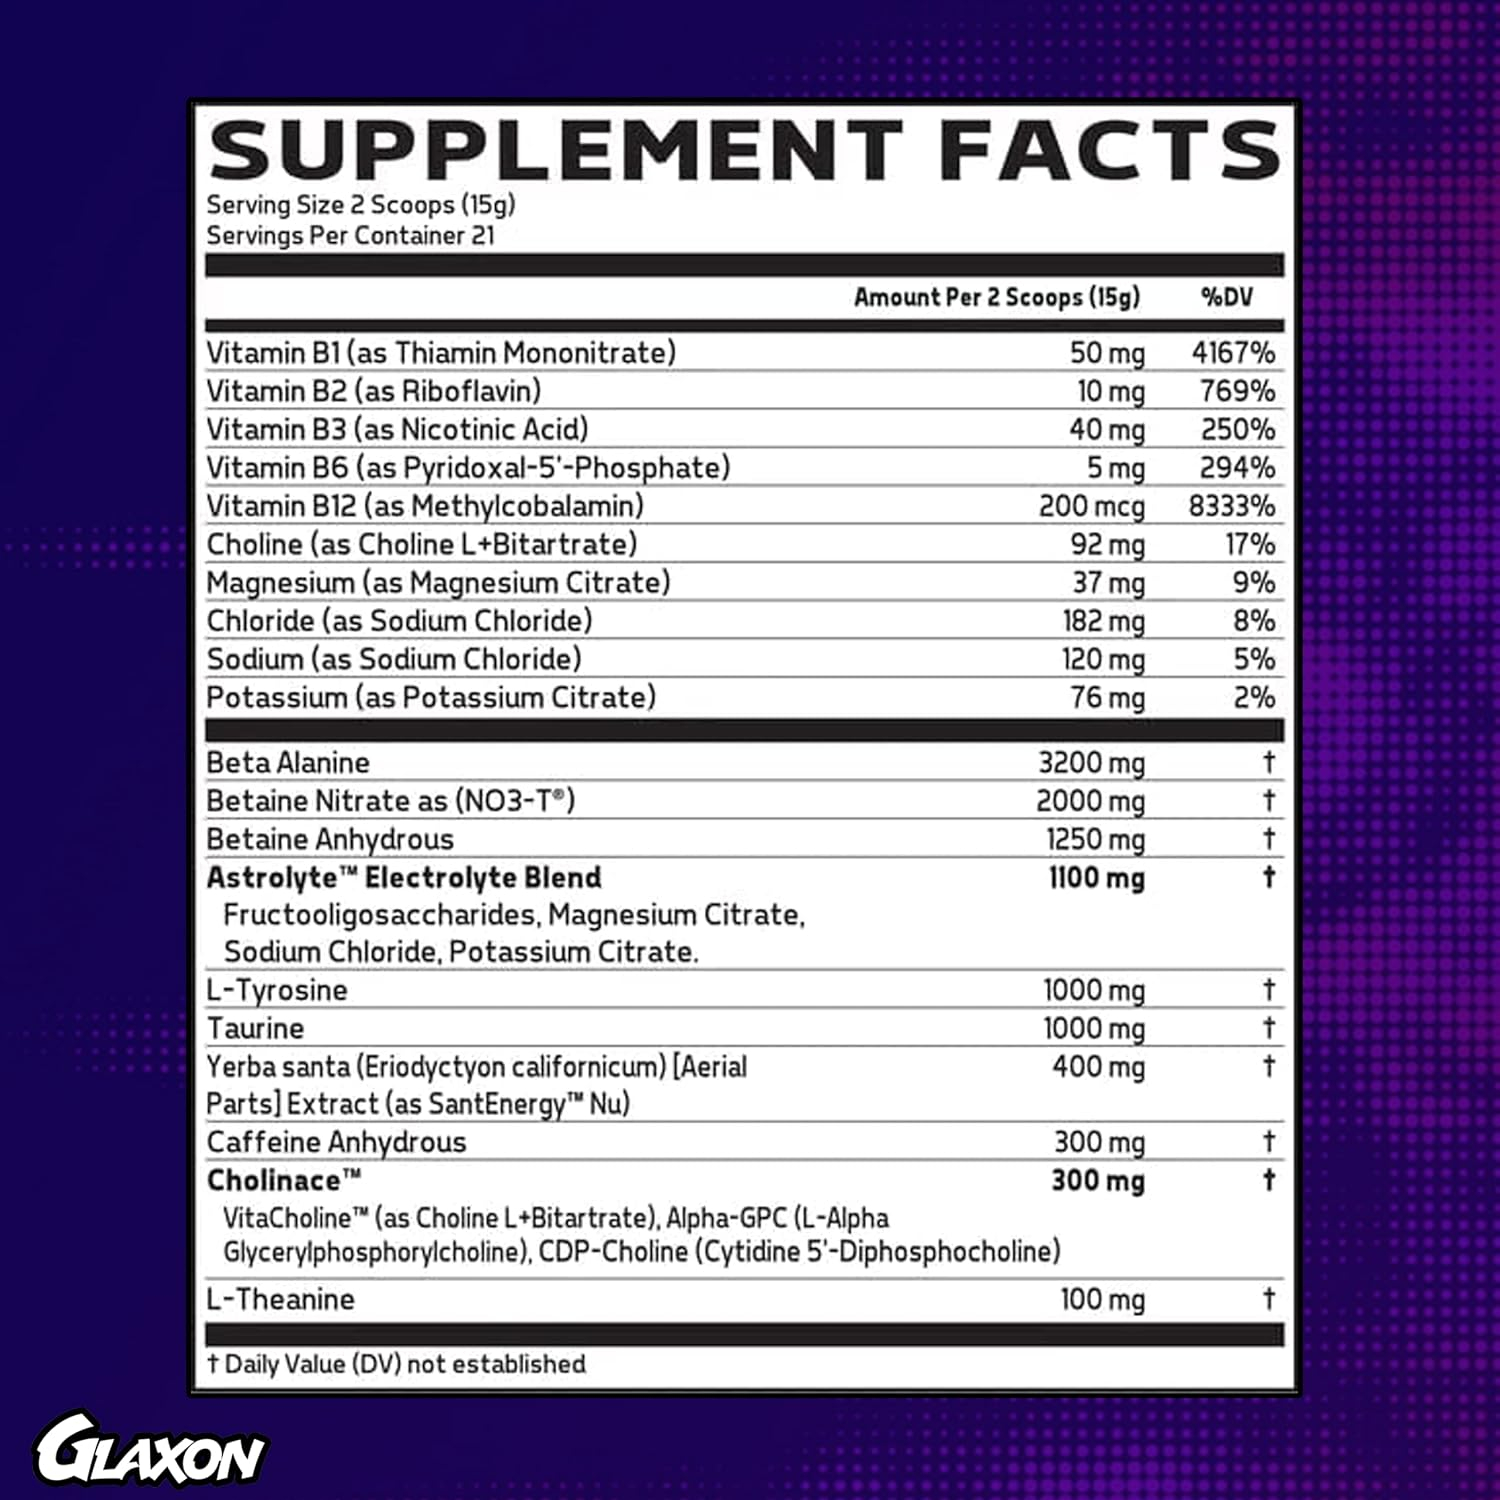 Glaxon Specimen High Stimulant Pre Workout Powder, Preworkout with 300mg Caffeine and 3200mg Beta Alanine Per Serving for Workout-Dominating Energy, Focus, and Pump (Watermelon Ice)